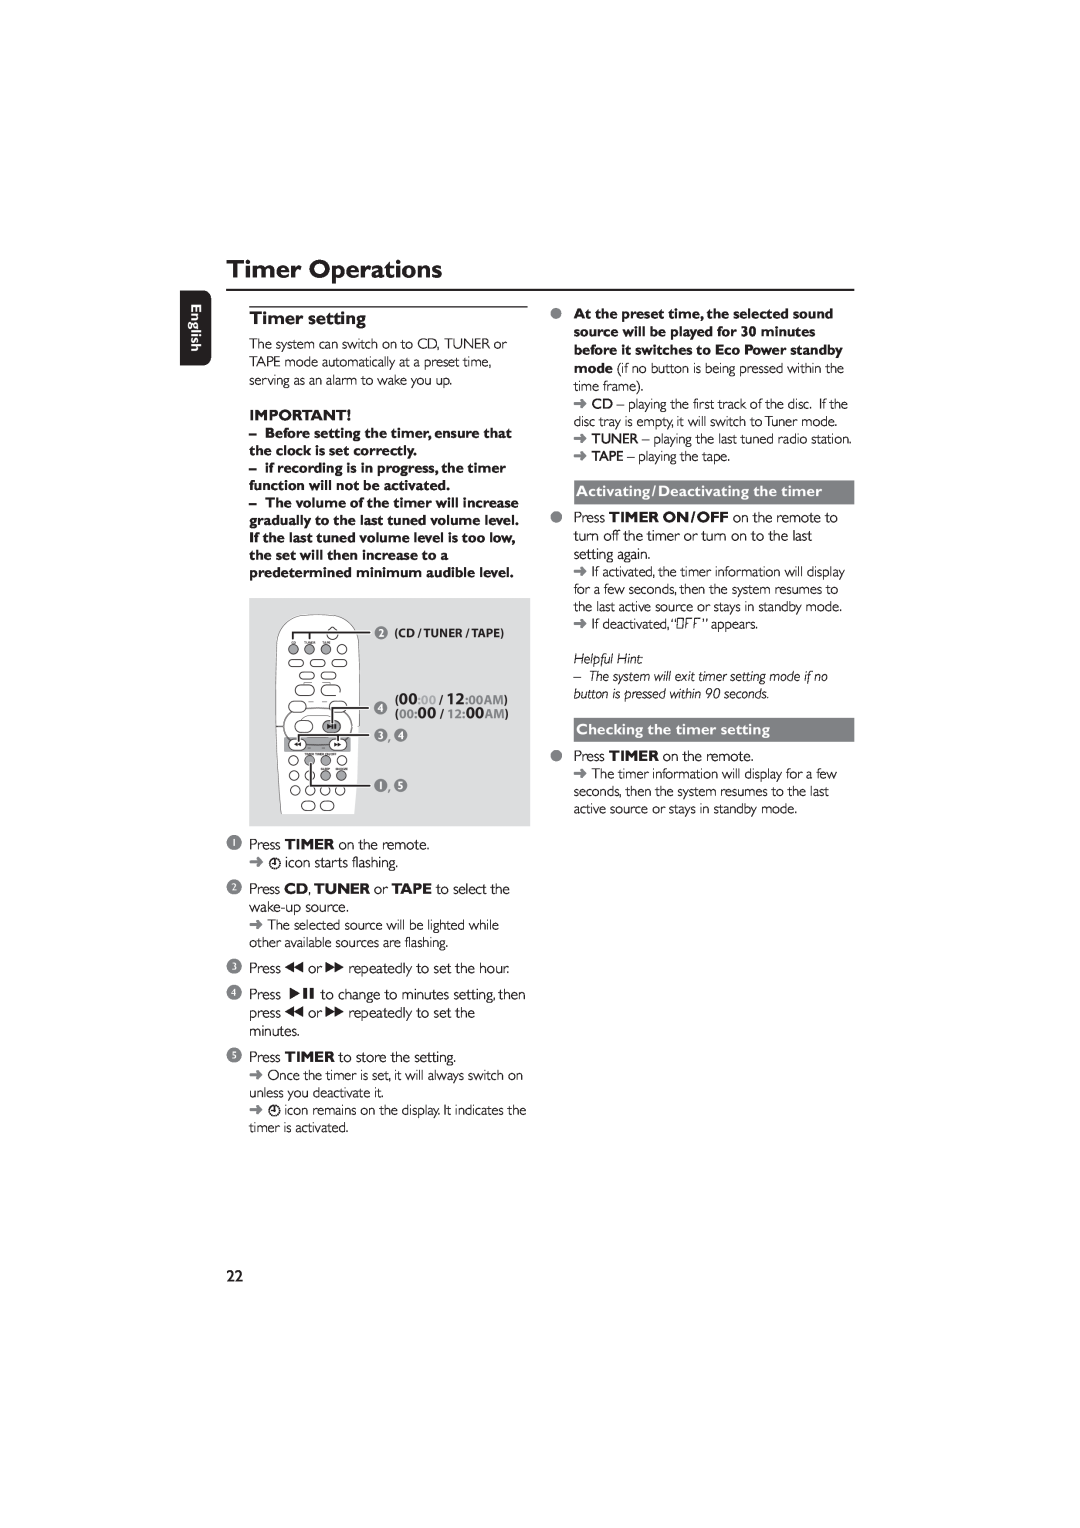 Philips MCM5 user manual Timer Operations, Timer setting, English, Activating/Deactivating the timer, Helpful Hint 